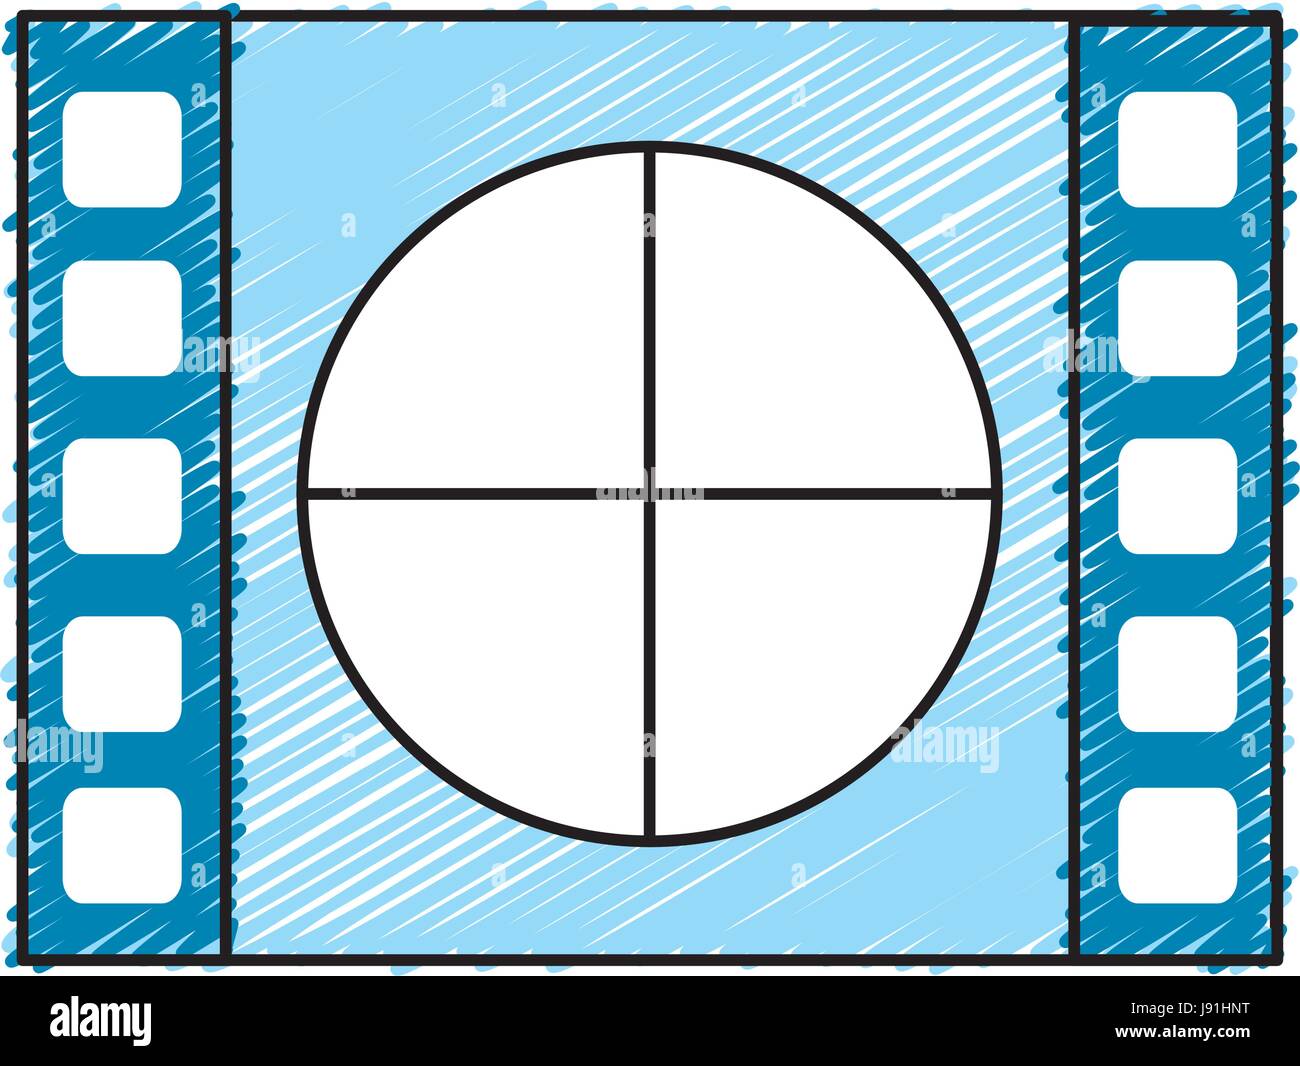 film countdown to projection of movie Stock Vector